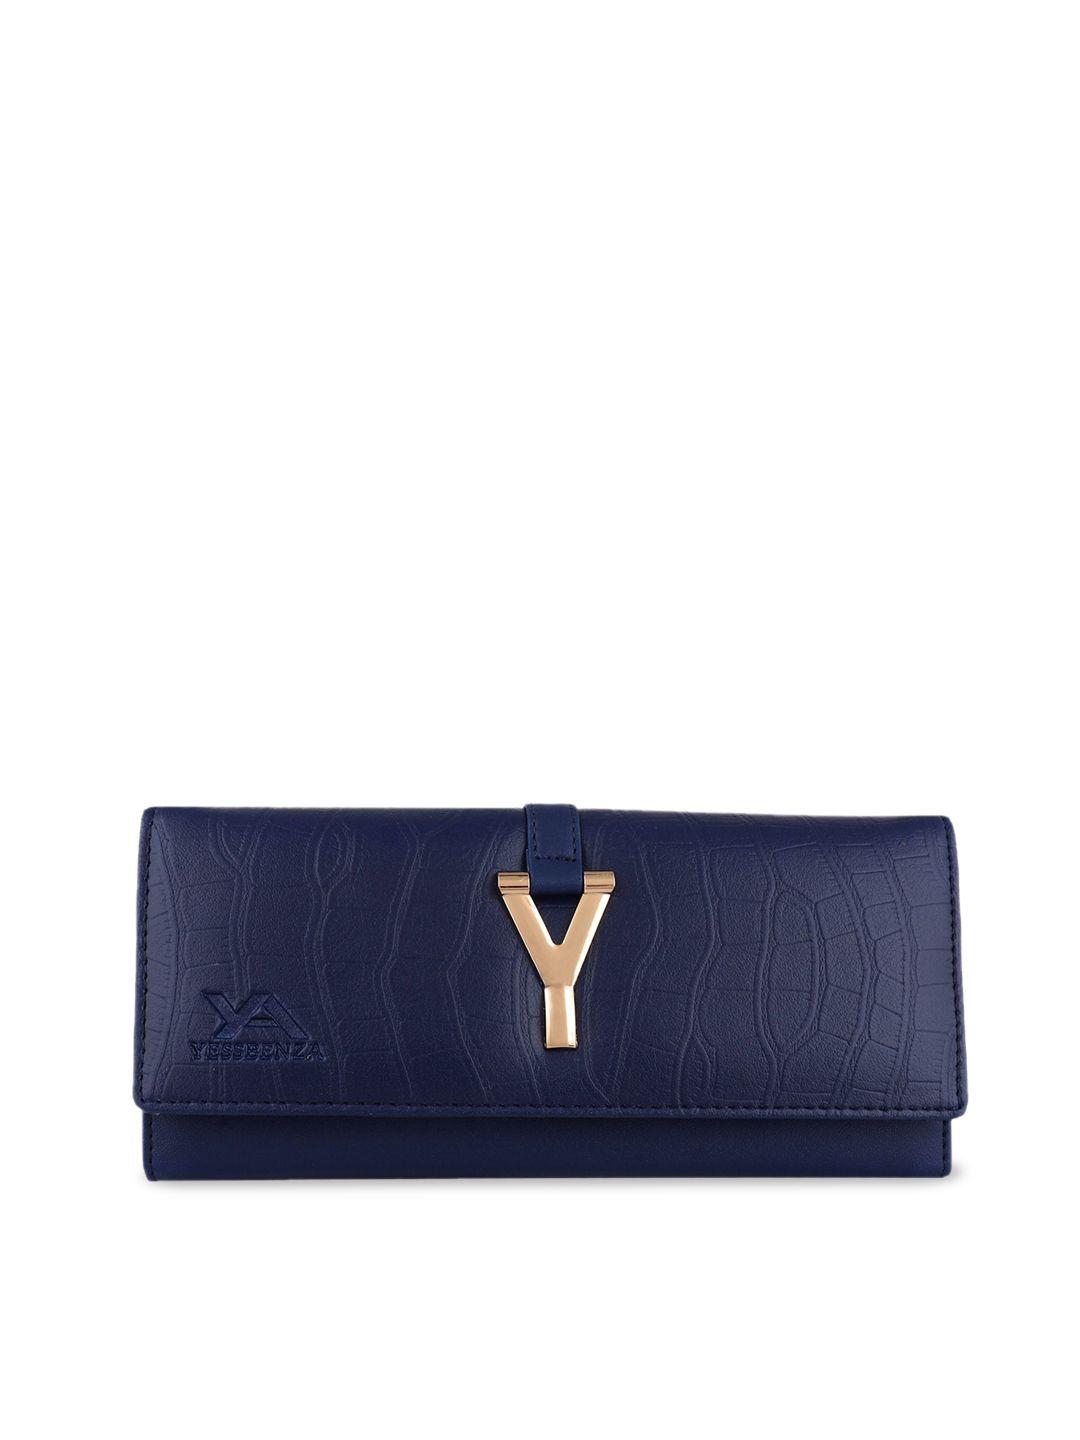 yessbenza navy blue & gold-toned textured buckle detail envelope clutch